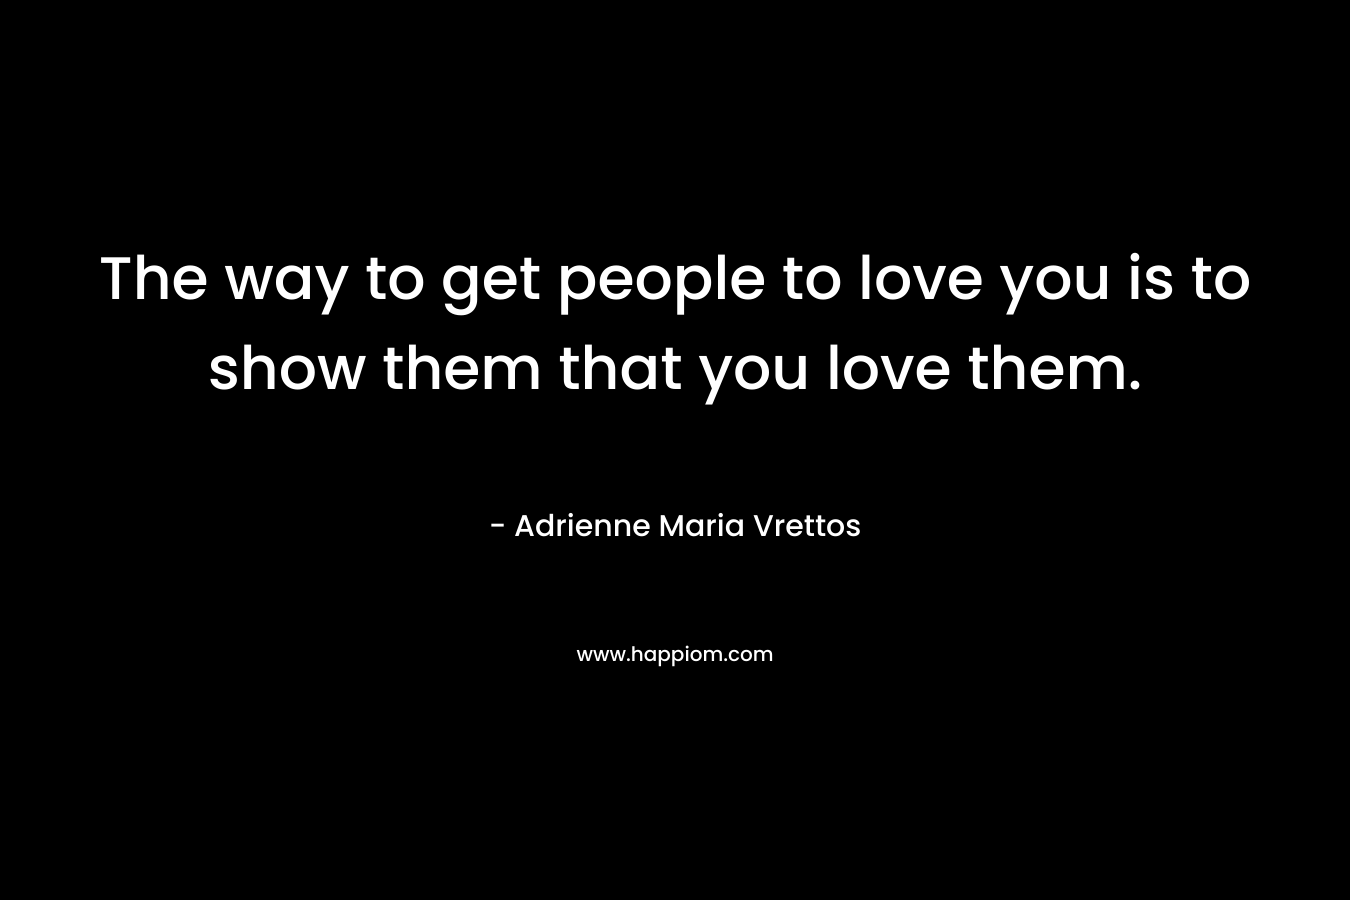 The way to get people to love you is to show them that you love them.